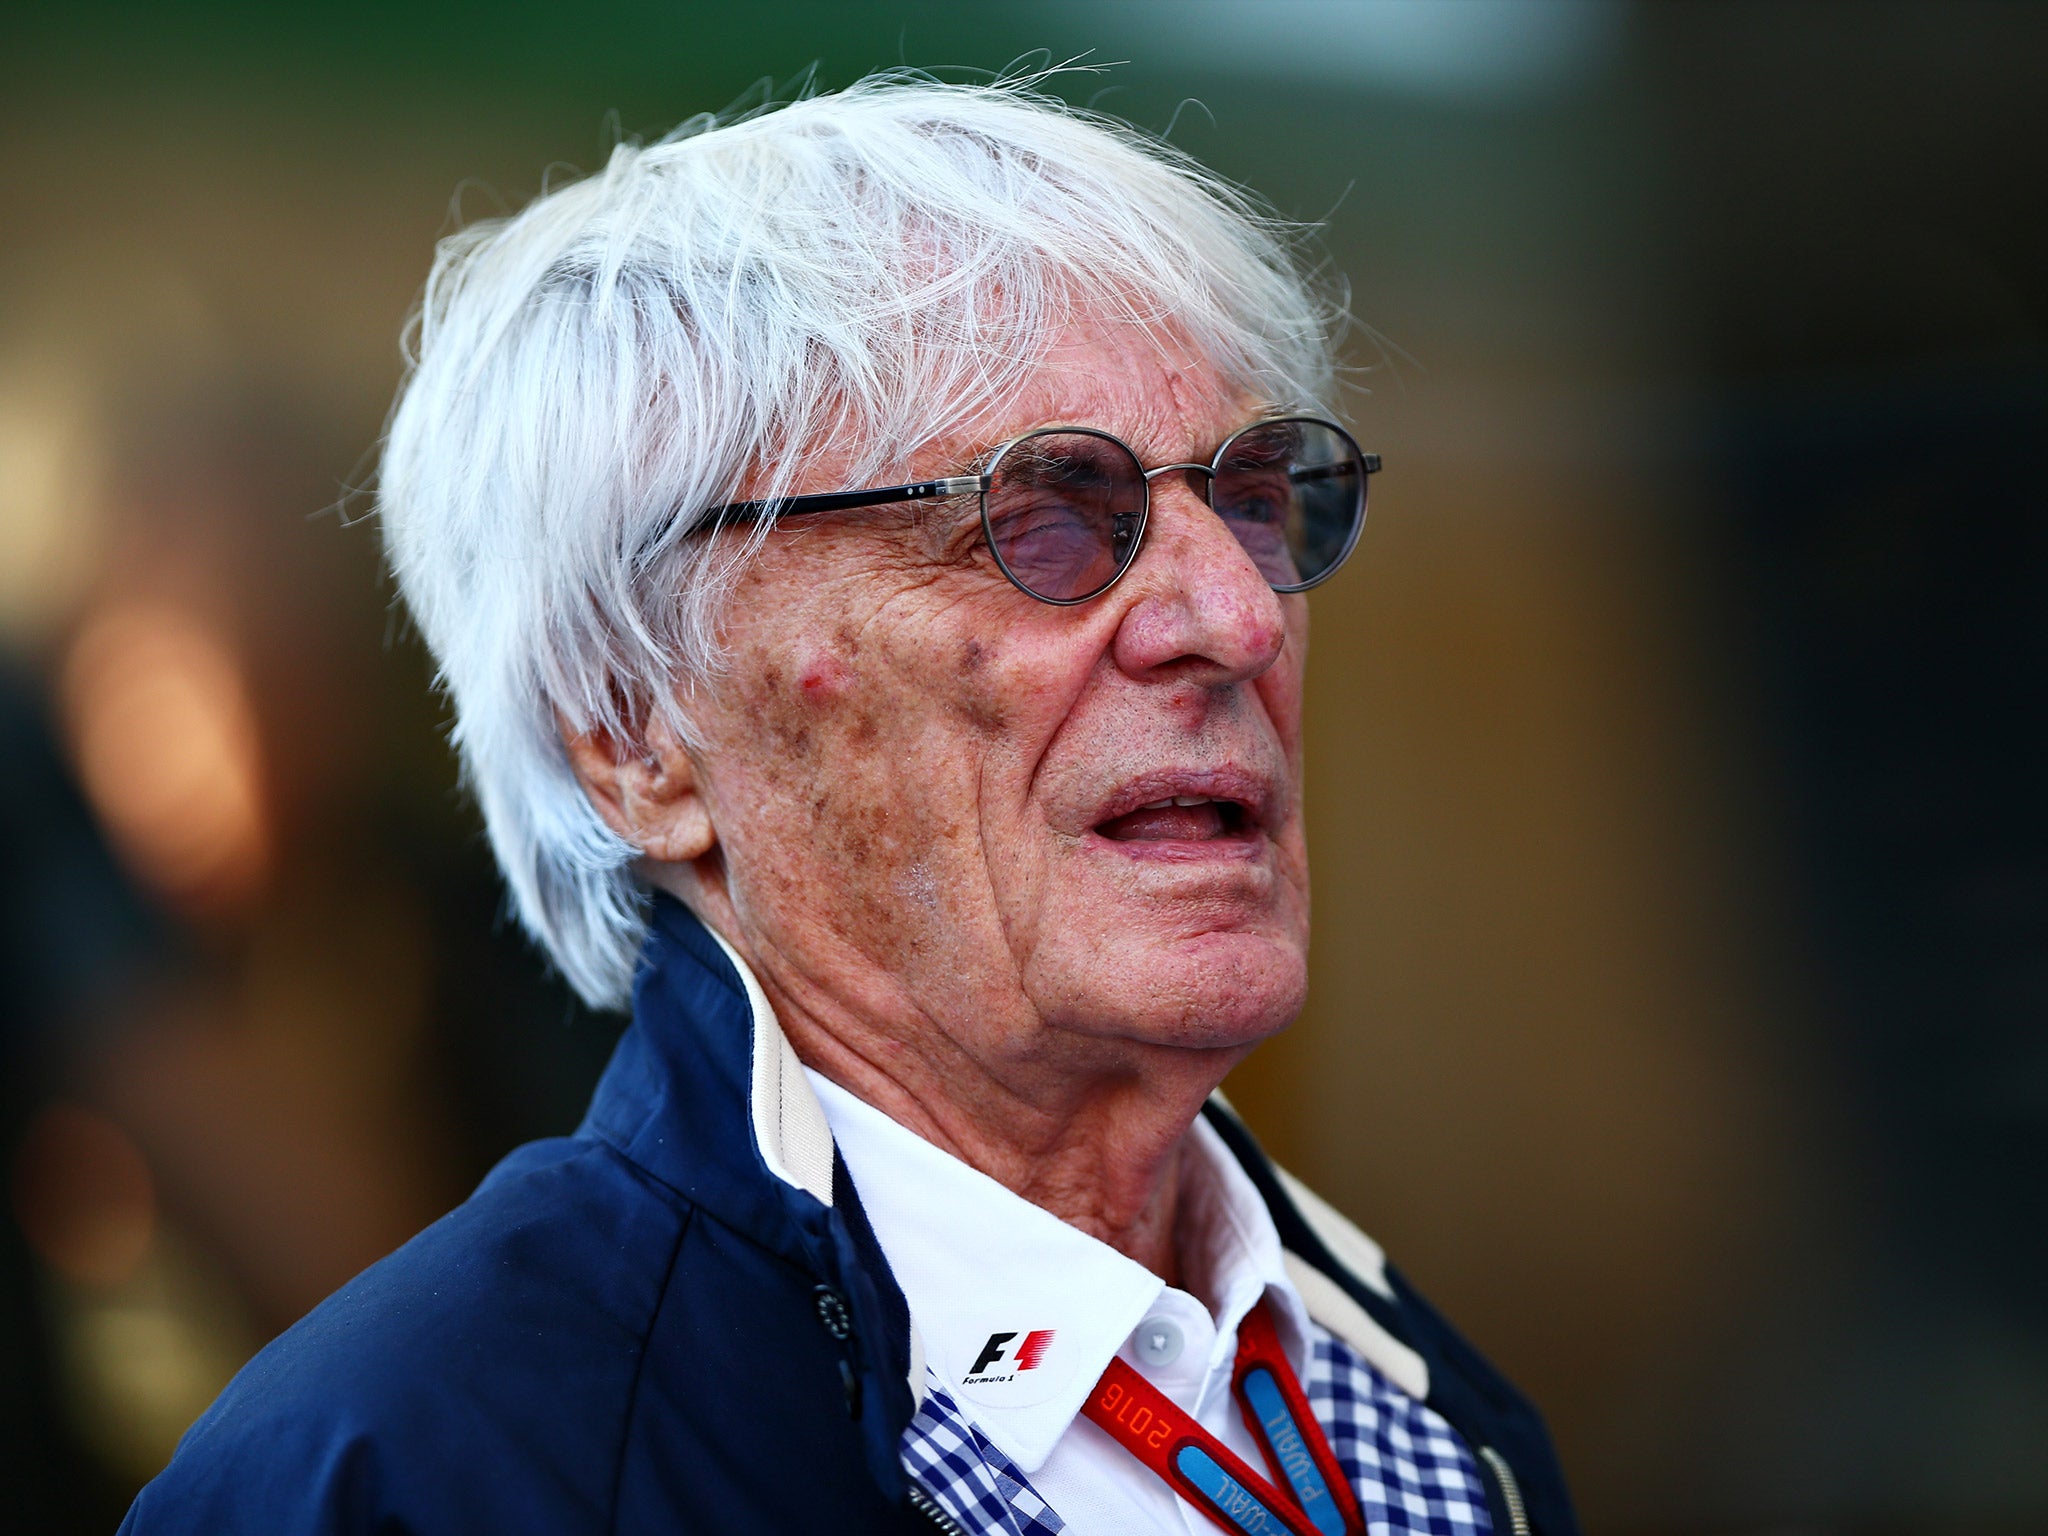 Formula One boss Bernie Ecclestone owns the £70m house his daughter and son-in-law live in